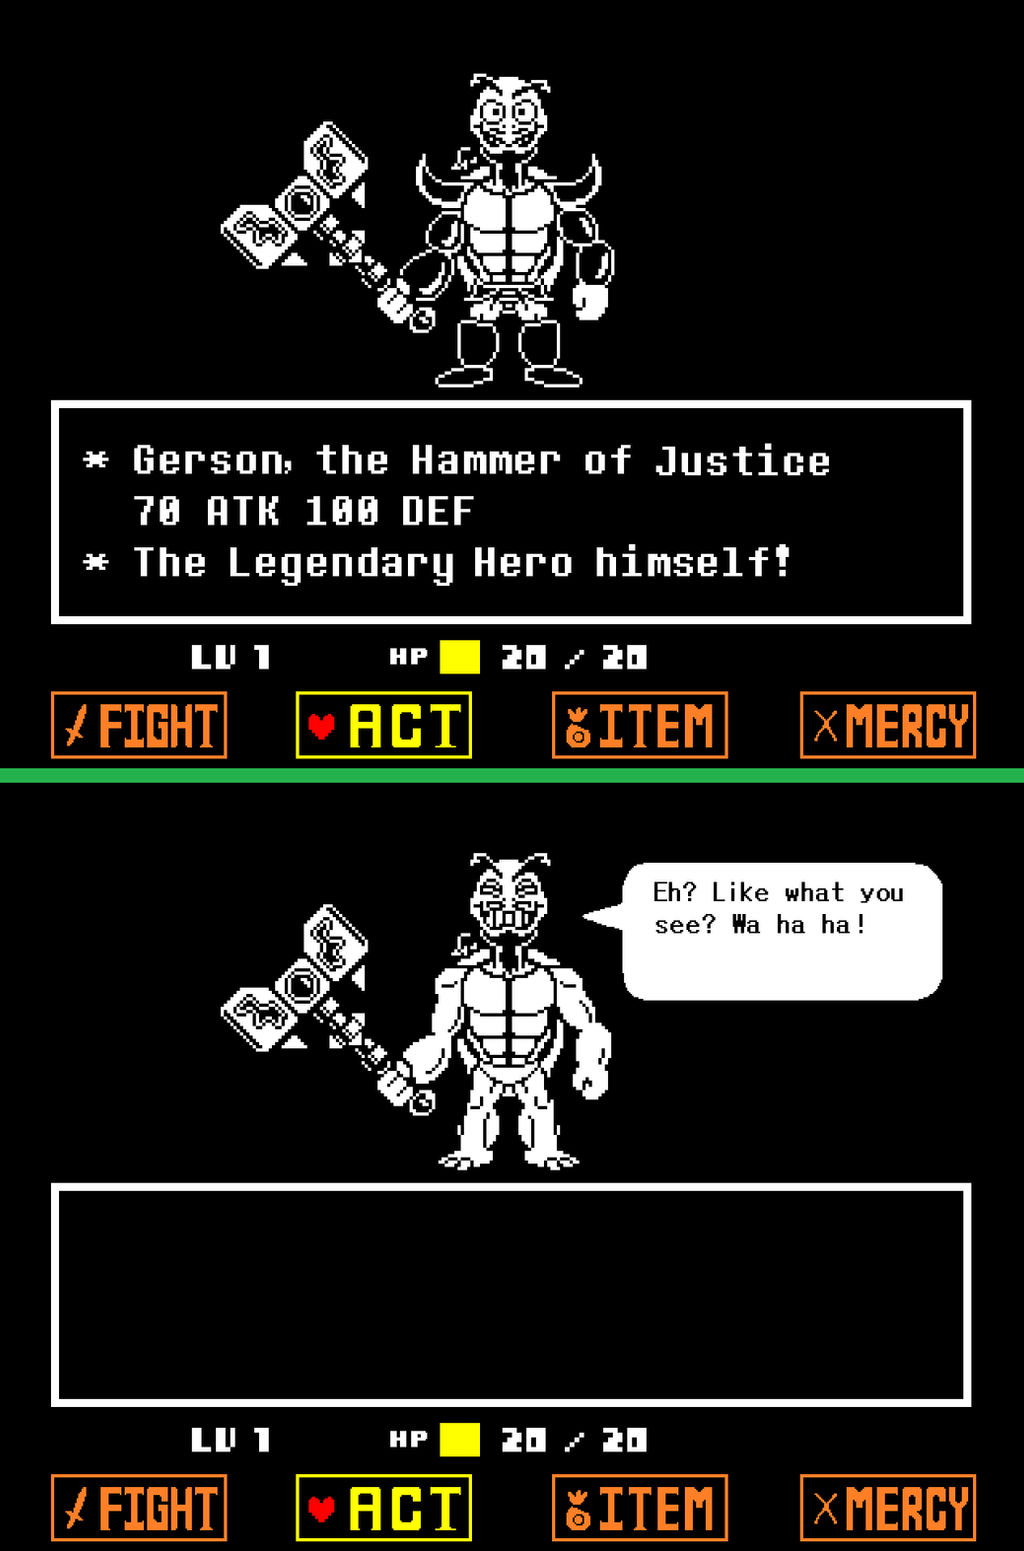 Gerson, the Hammer of Justice!